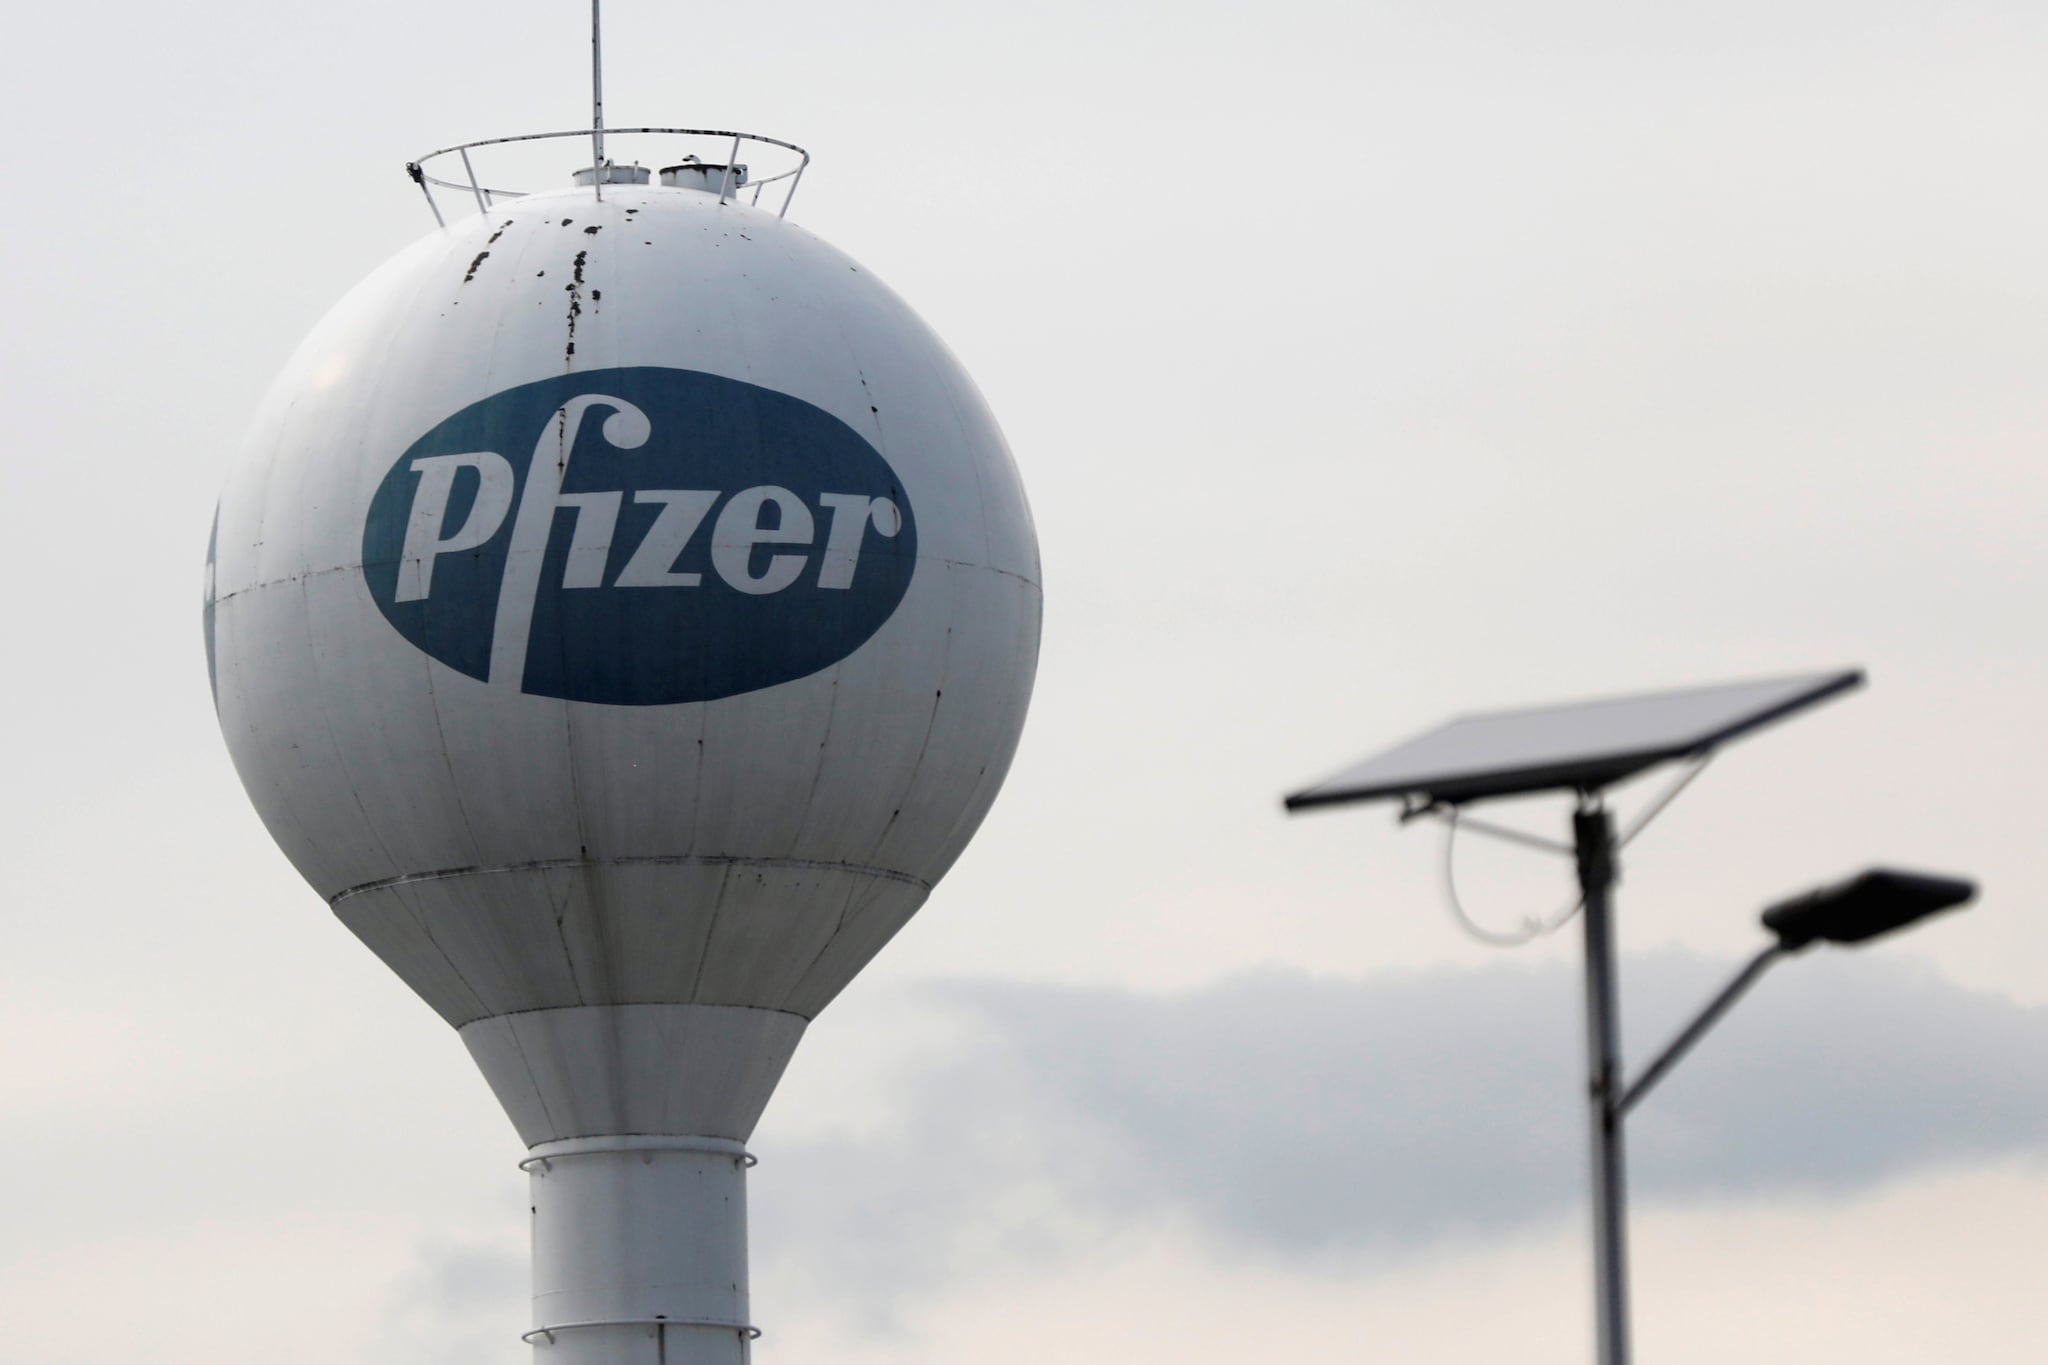  Pfizer:  The company’s net profit in Q1FY21 rose 10.3 percent to Rs 124.5 crore from Rs 112.8 crore while revenue declined 5.4 percent to Rs 514.9 crore from Rs 544.4 crore, YoY. (Image: Reuters)